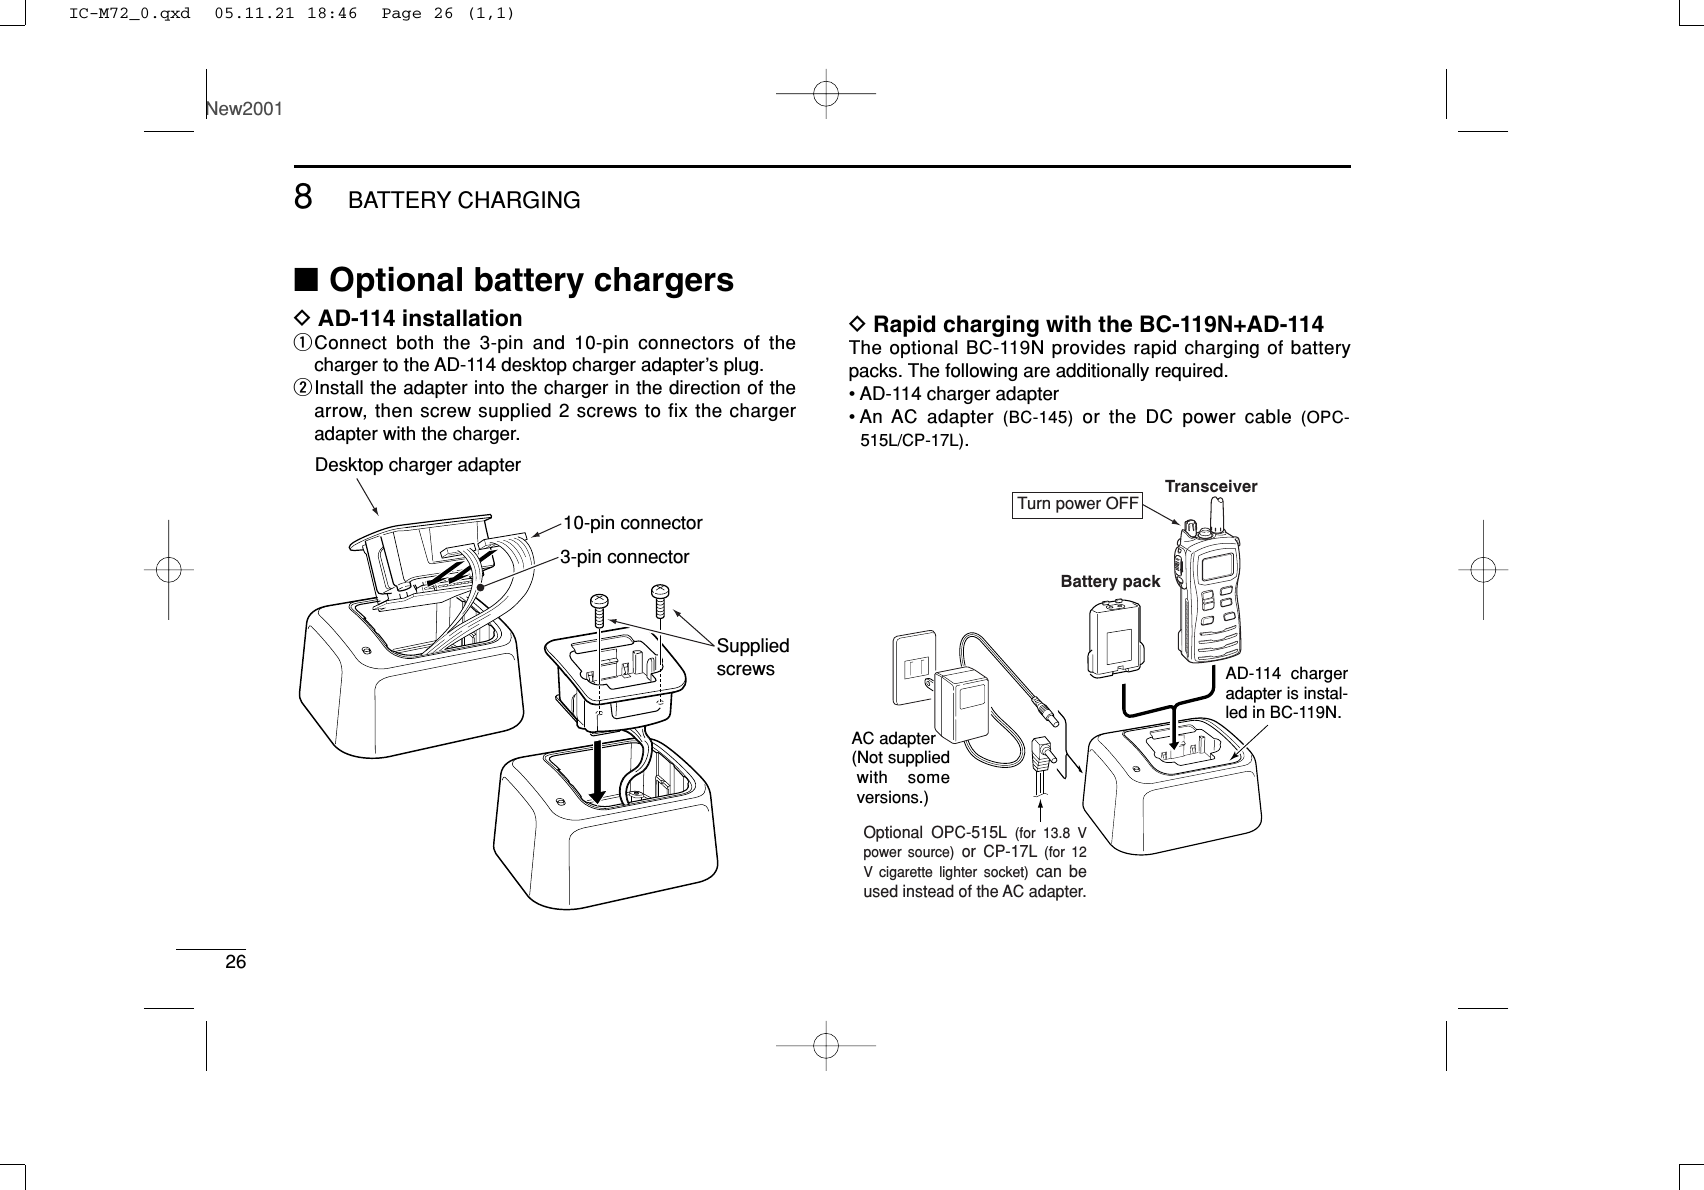 268BATTERY CHARGINGNew2001■Optional battery chargersDAD-114 installationqConnect both the 3-pin and 10-pin connectors of thecharger to the AD-114 desktop charger adapter’s plug.wInstall the adapter into the charger in the direction of thearrow, then screw supplied 2 screws to fix the chargeradapter with the charger.DRapid charging with the BC-119N+AD-114The optional BC-119N provides rapid charging of batterypacks. The following are additionally required.• AD-114 charger adapter• An  AC  adapter  (BC-145) or the DC power cable (OPC-515L/CP-17L).AD-114 charger adapter is instal-led in BC-119N.AC adapter(Not supplied with some versions.)Optional OPC-515L (for 13.8 V power source) or CP-17L (for 12 V cigarette lighter socket) can be used instead of the AC adapter.TransceiverBattery packTurn power OFFDesktop charger adapter10-pin connector3-pin connectorSuppliedscrewsIC-M72_0.qxd  05.11.21 18:46  Page 26 (1,1)